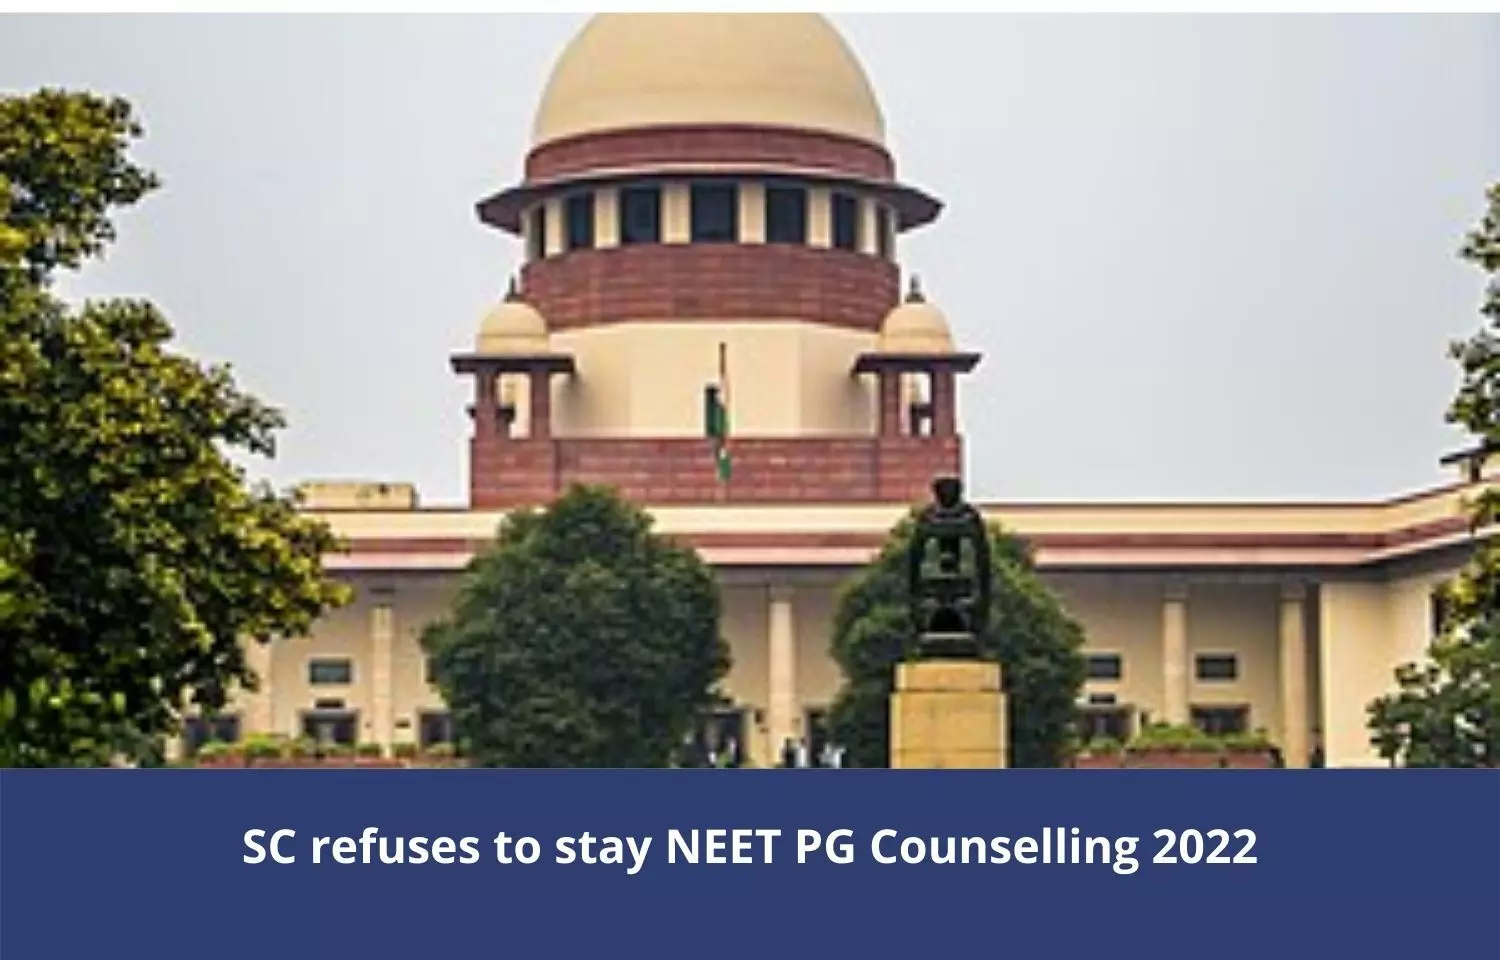 SC refuses to stay NEET PG Counselling 2022